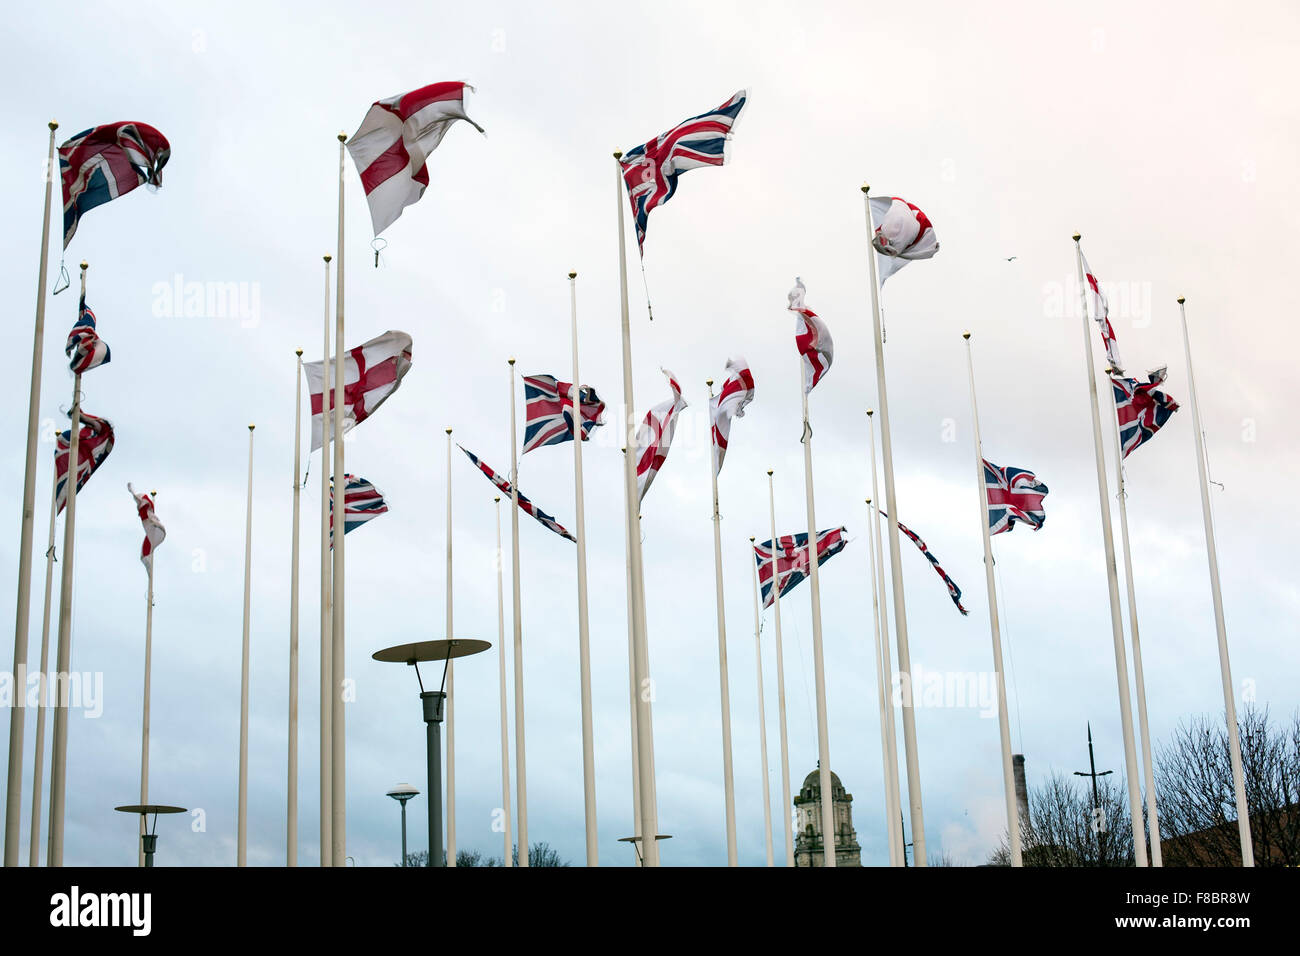 Flags St George's Union Jack fluttering wind blow Stock Photo